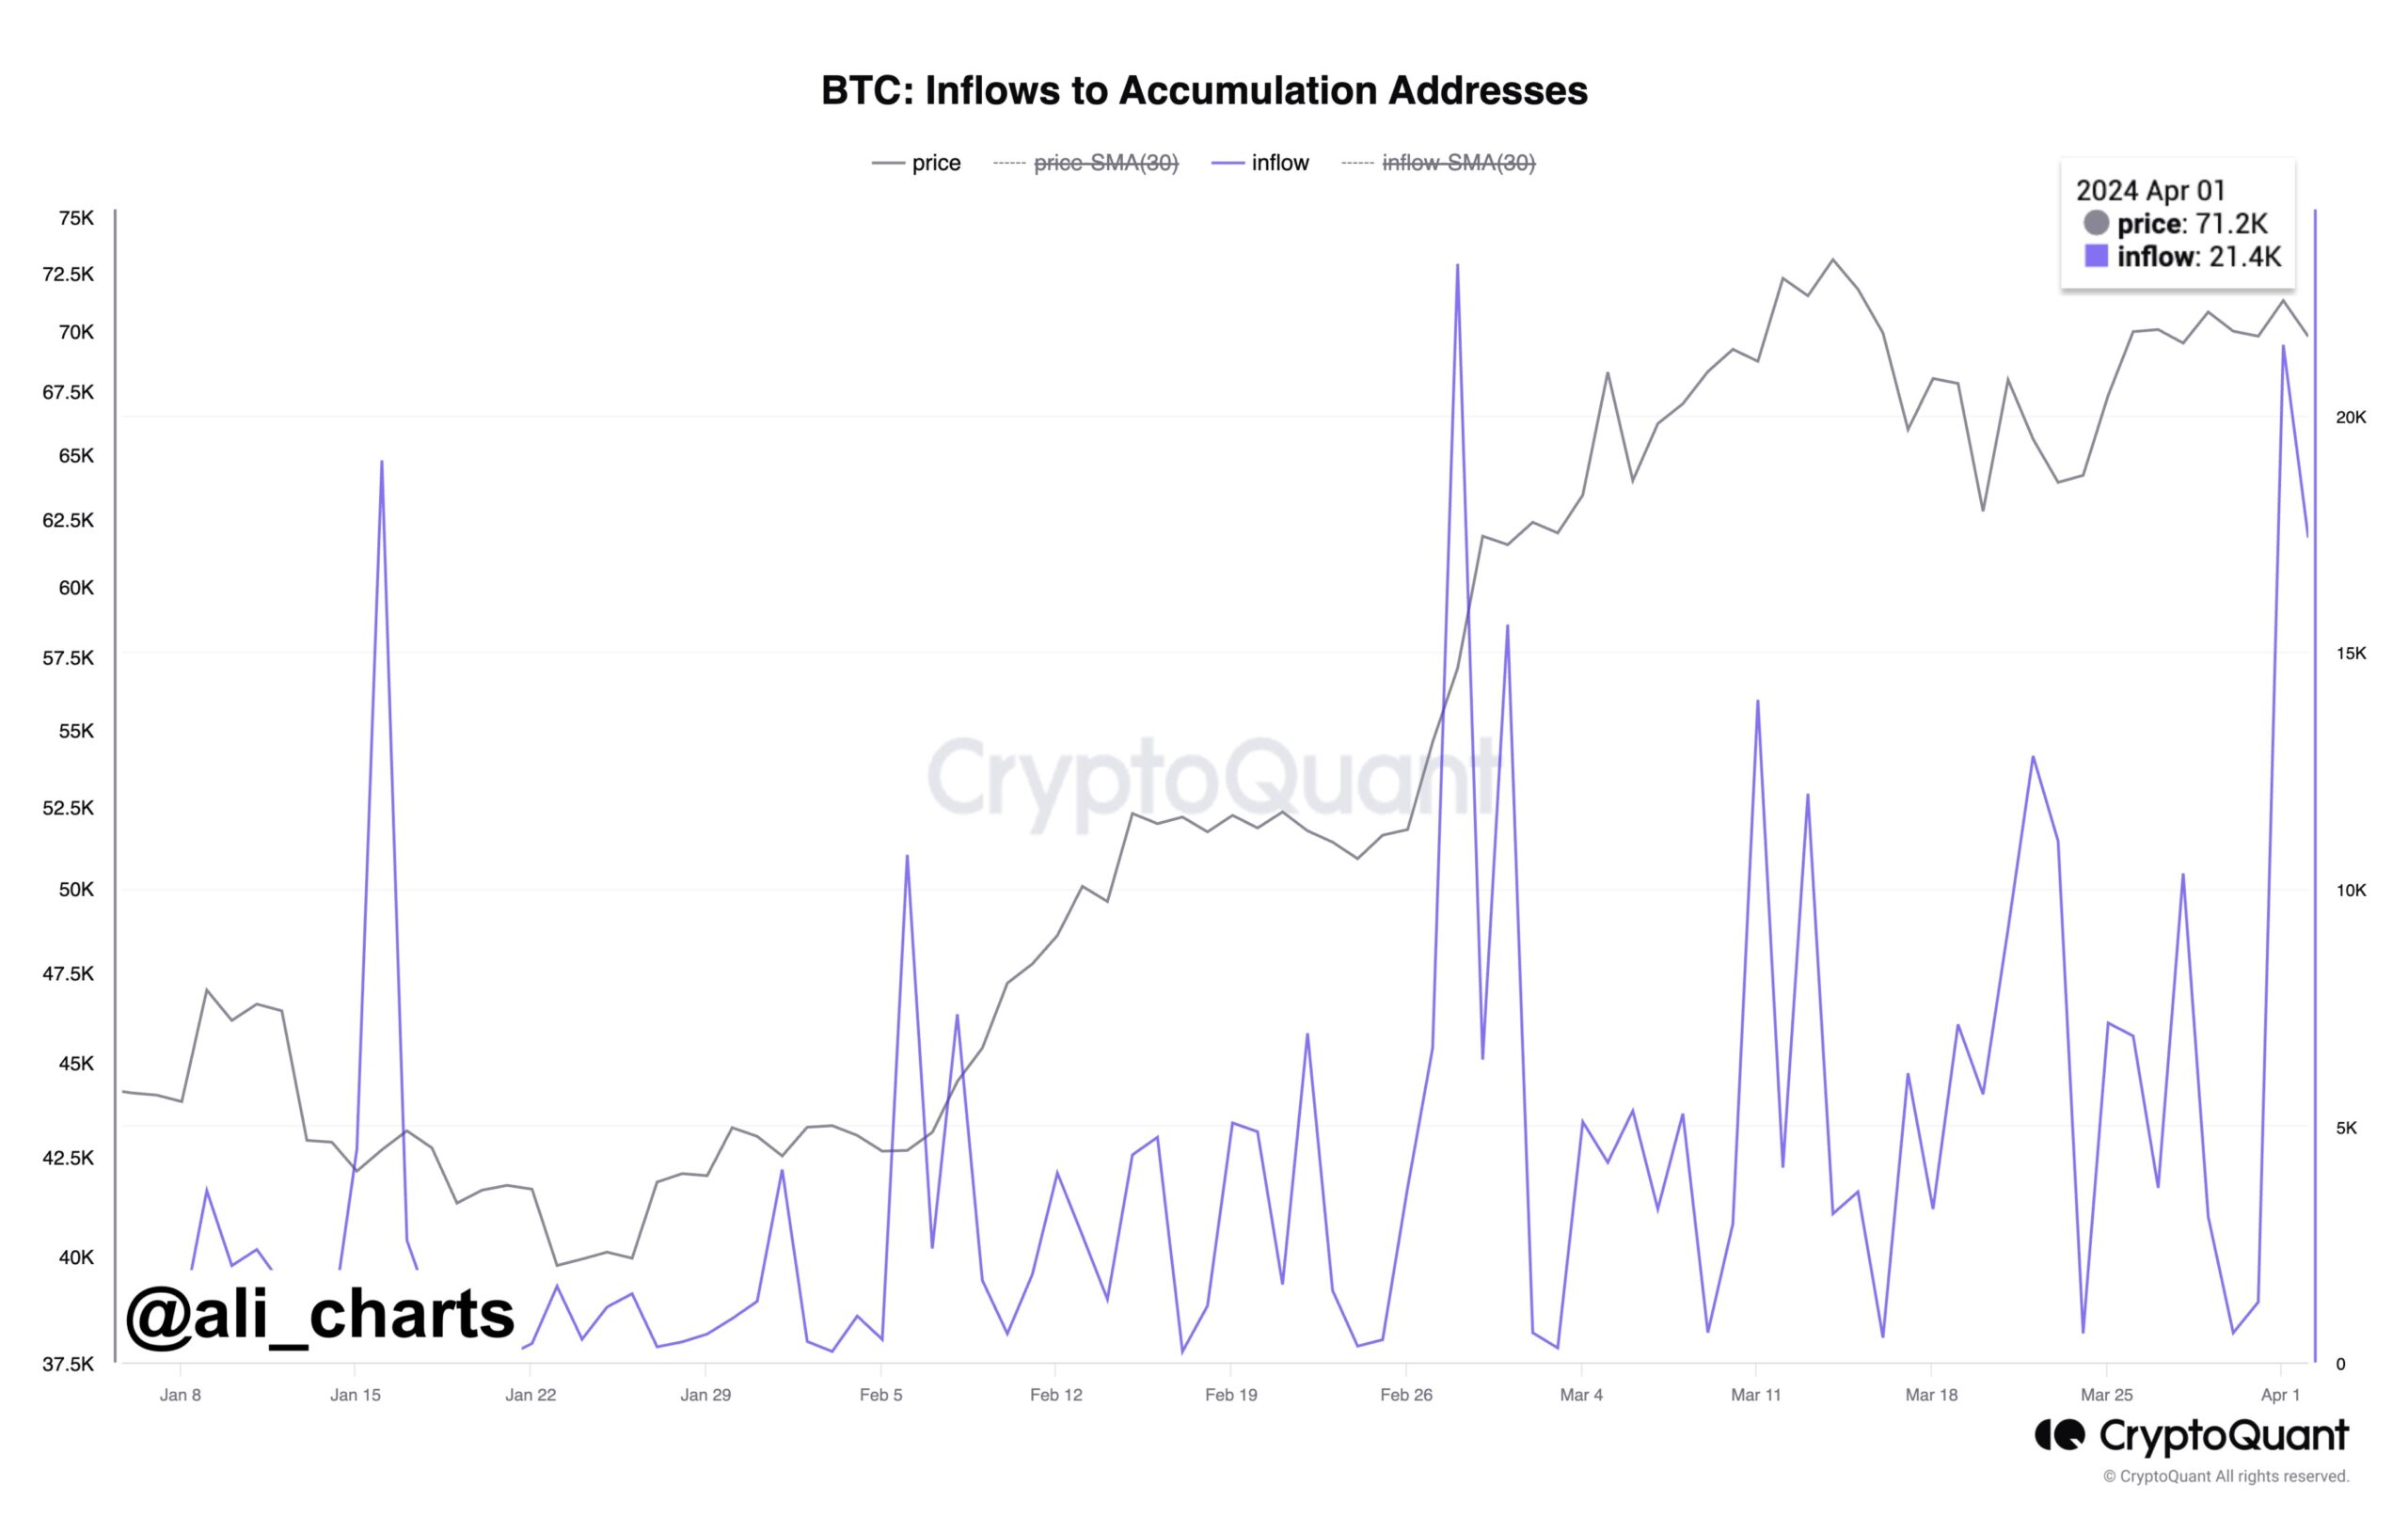 Graph of entries to BTC collection addresses